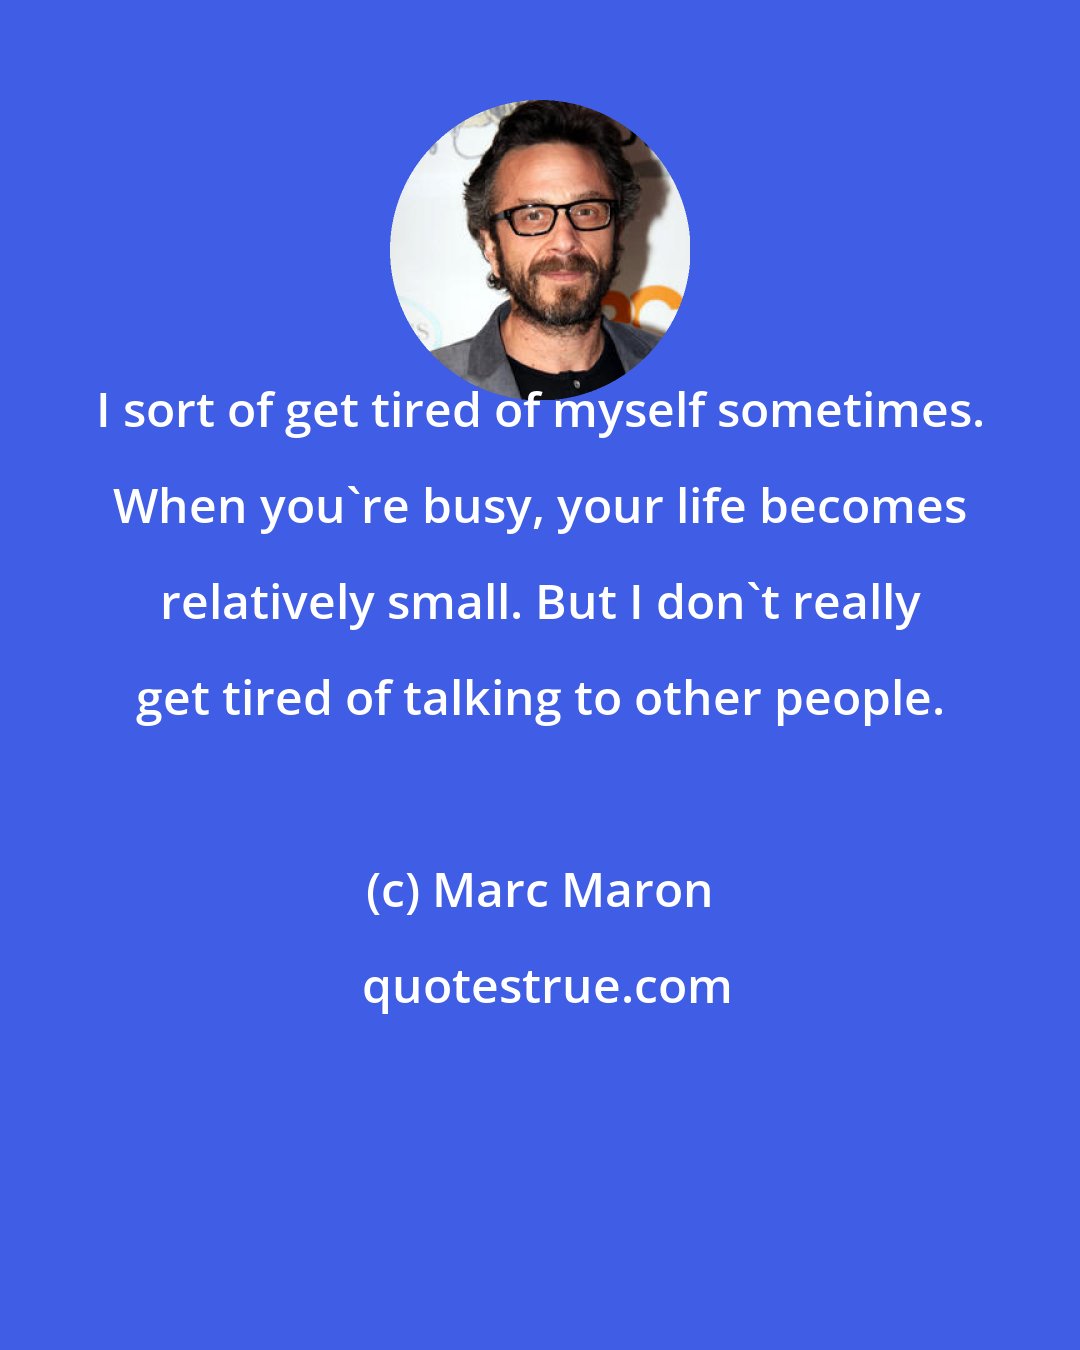 Marc Maron: I sort of get tired of myself sometimes. When you're busy, your life becomes relatively small. But I don't really get tired of talking to other people.